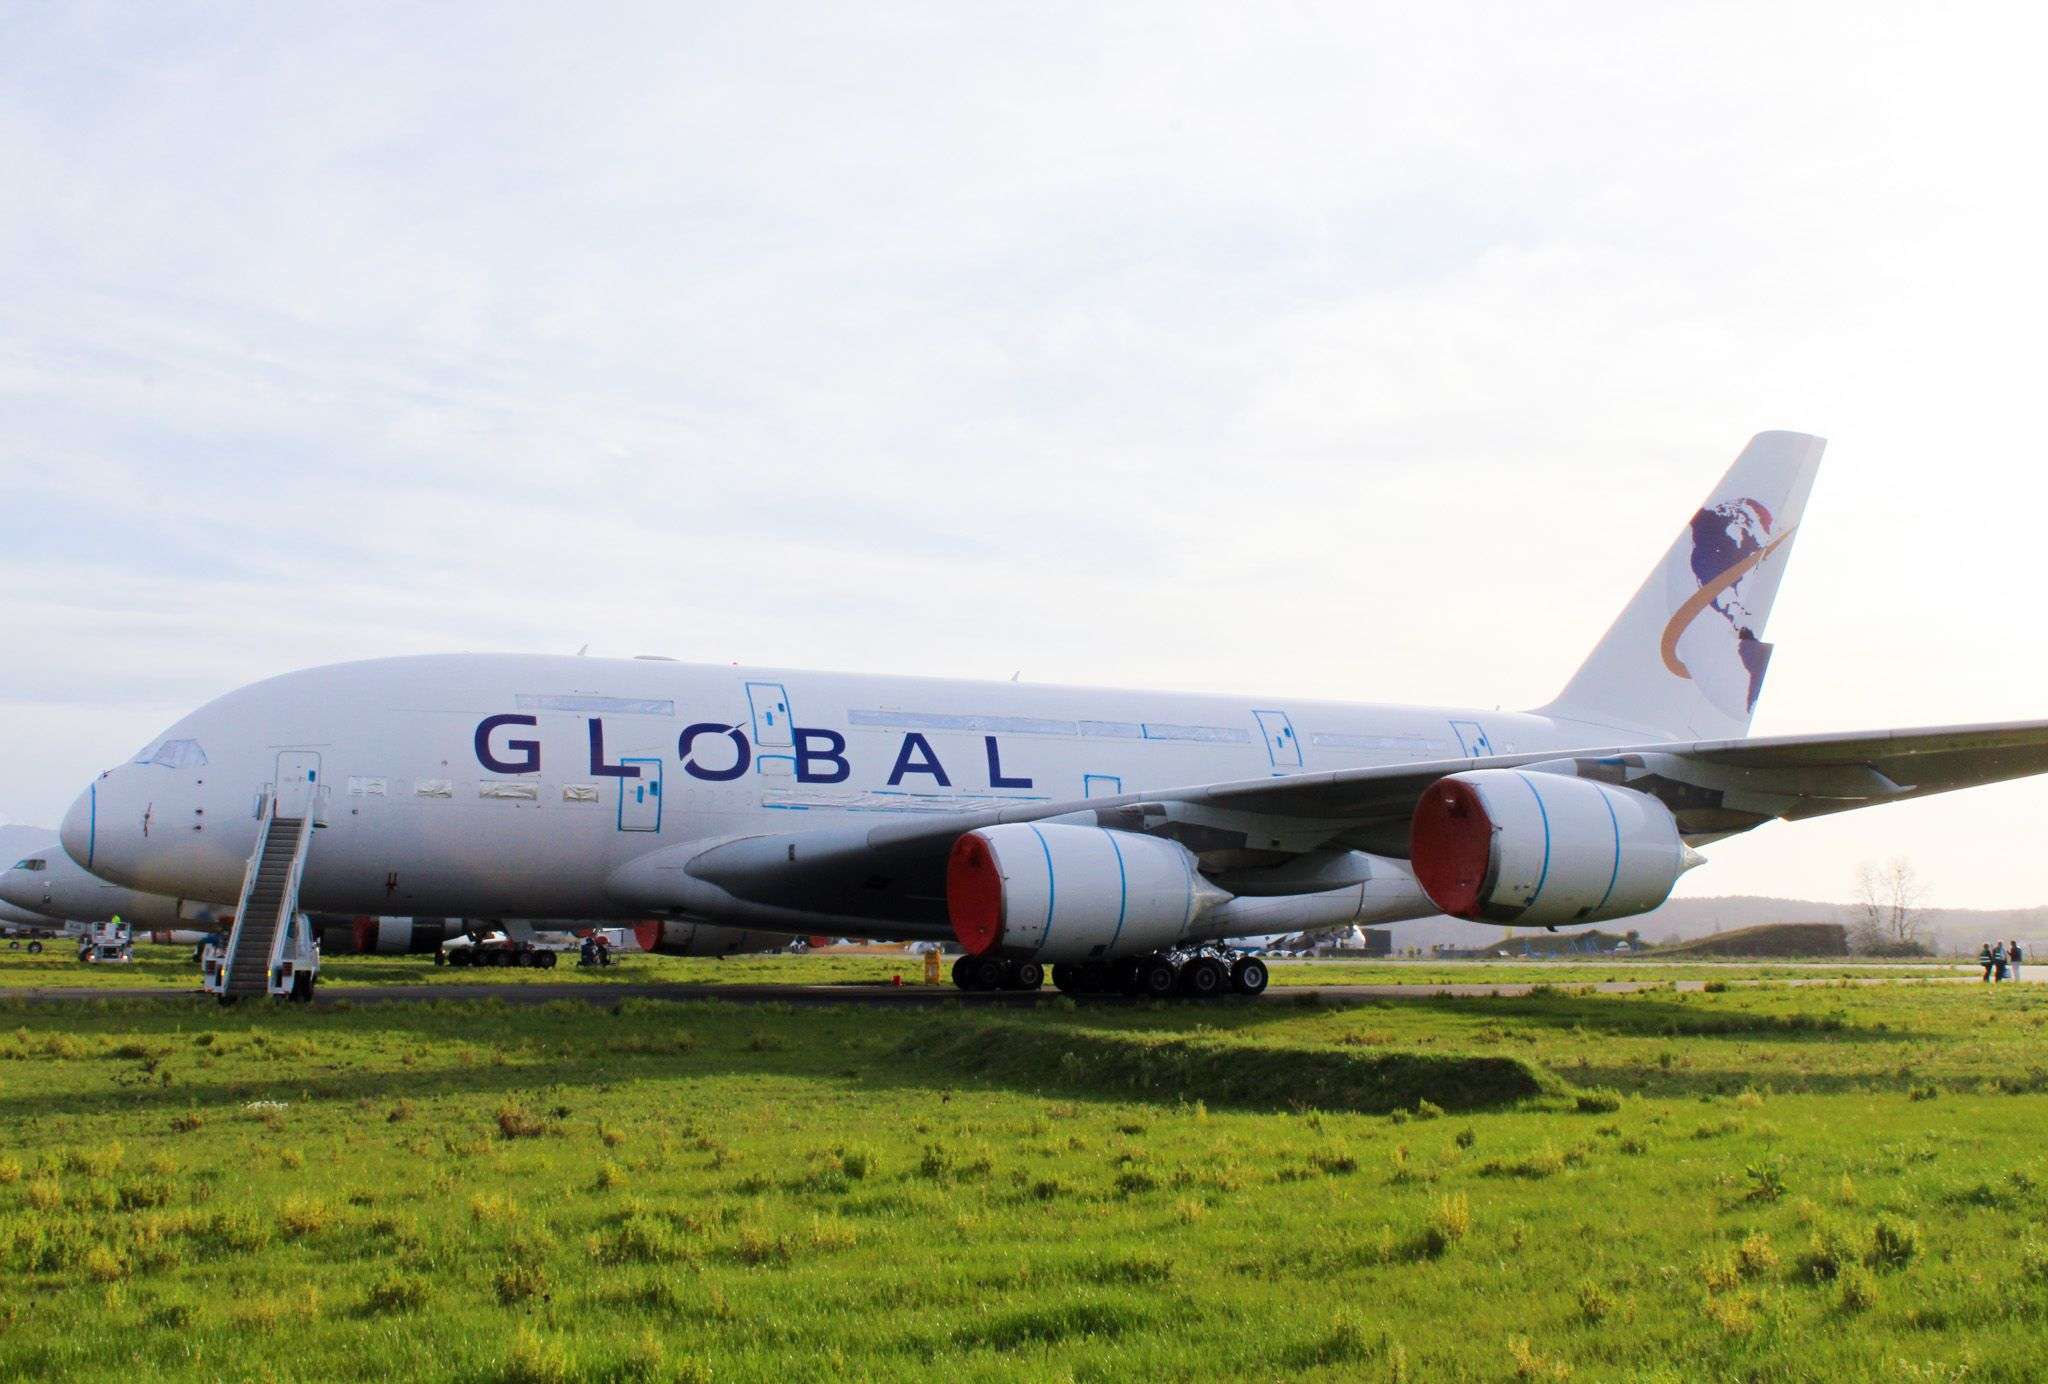 Global Airlines' First A380 Purchase: Will This Model Work?